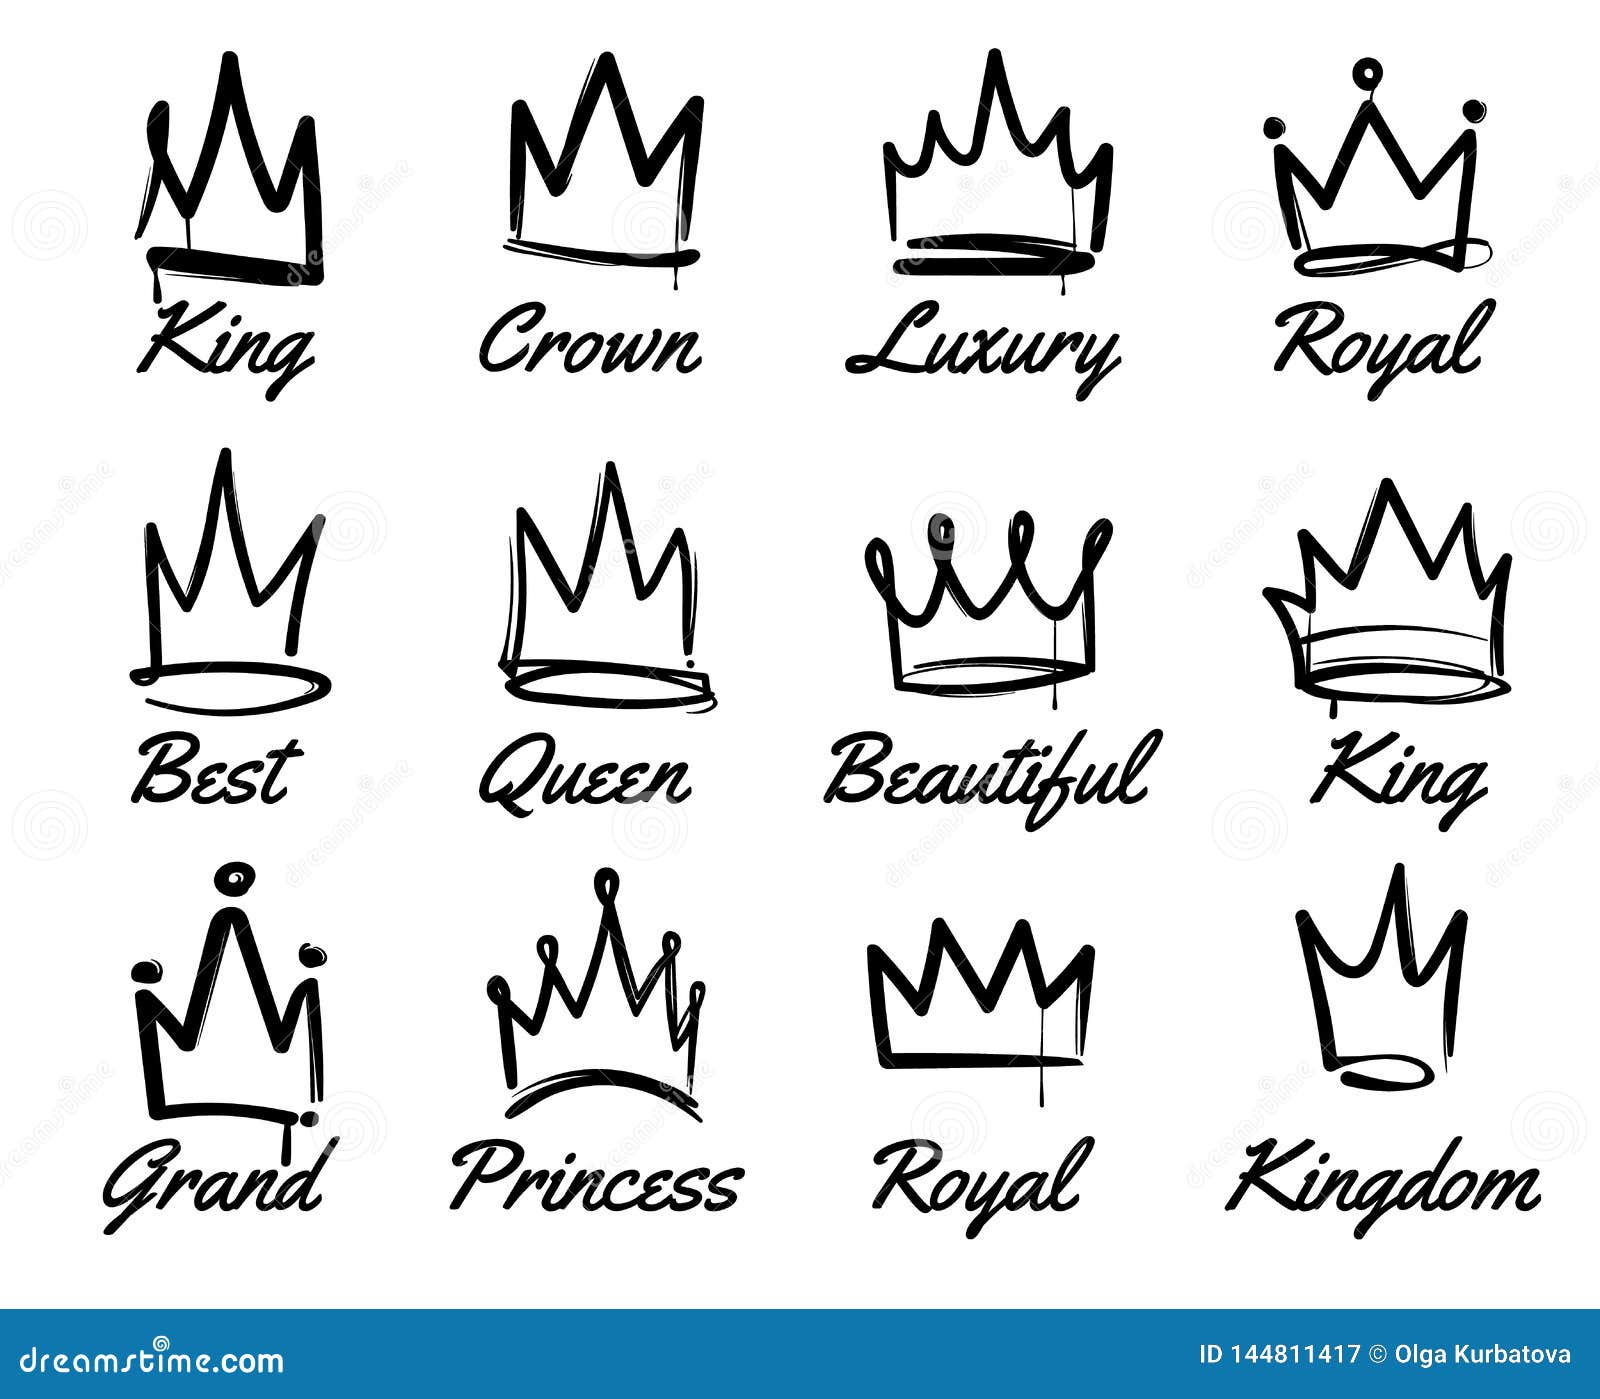  crown logo. hand drawn graffiti sketch and signs collections. black brush line  on white background